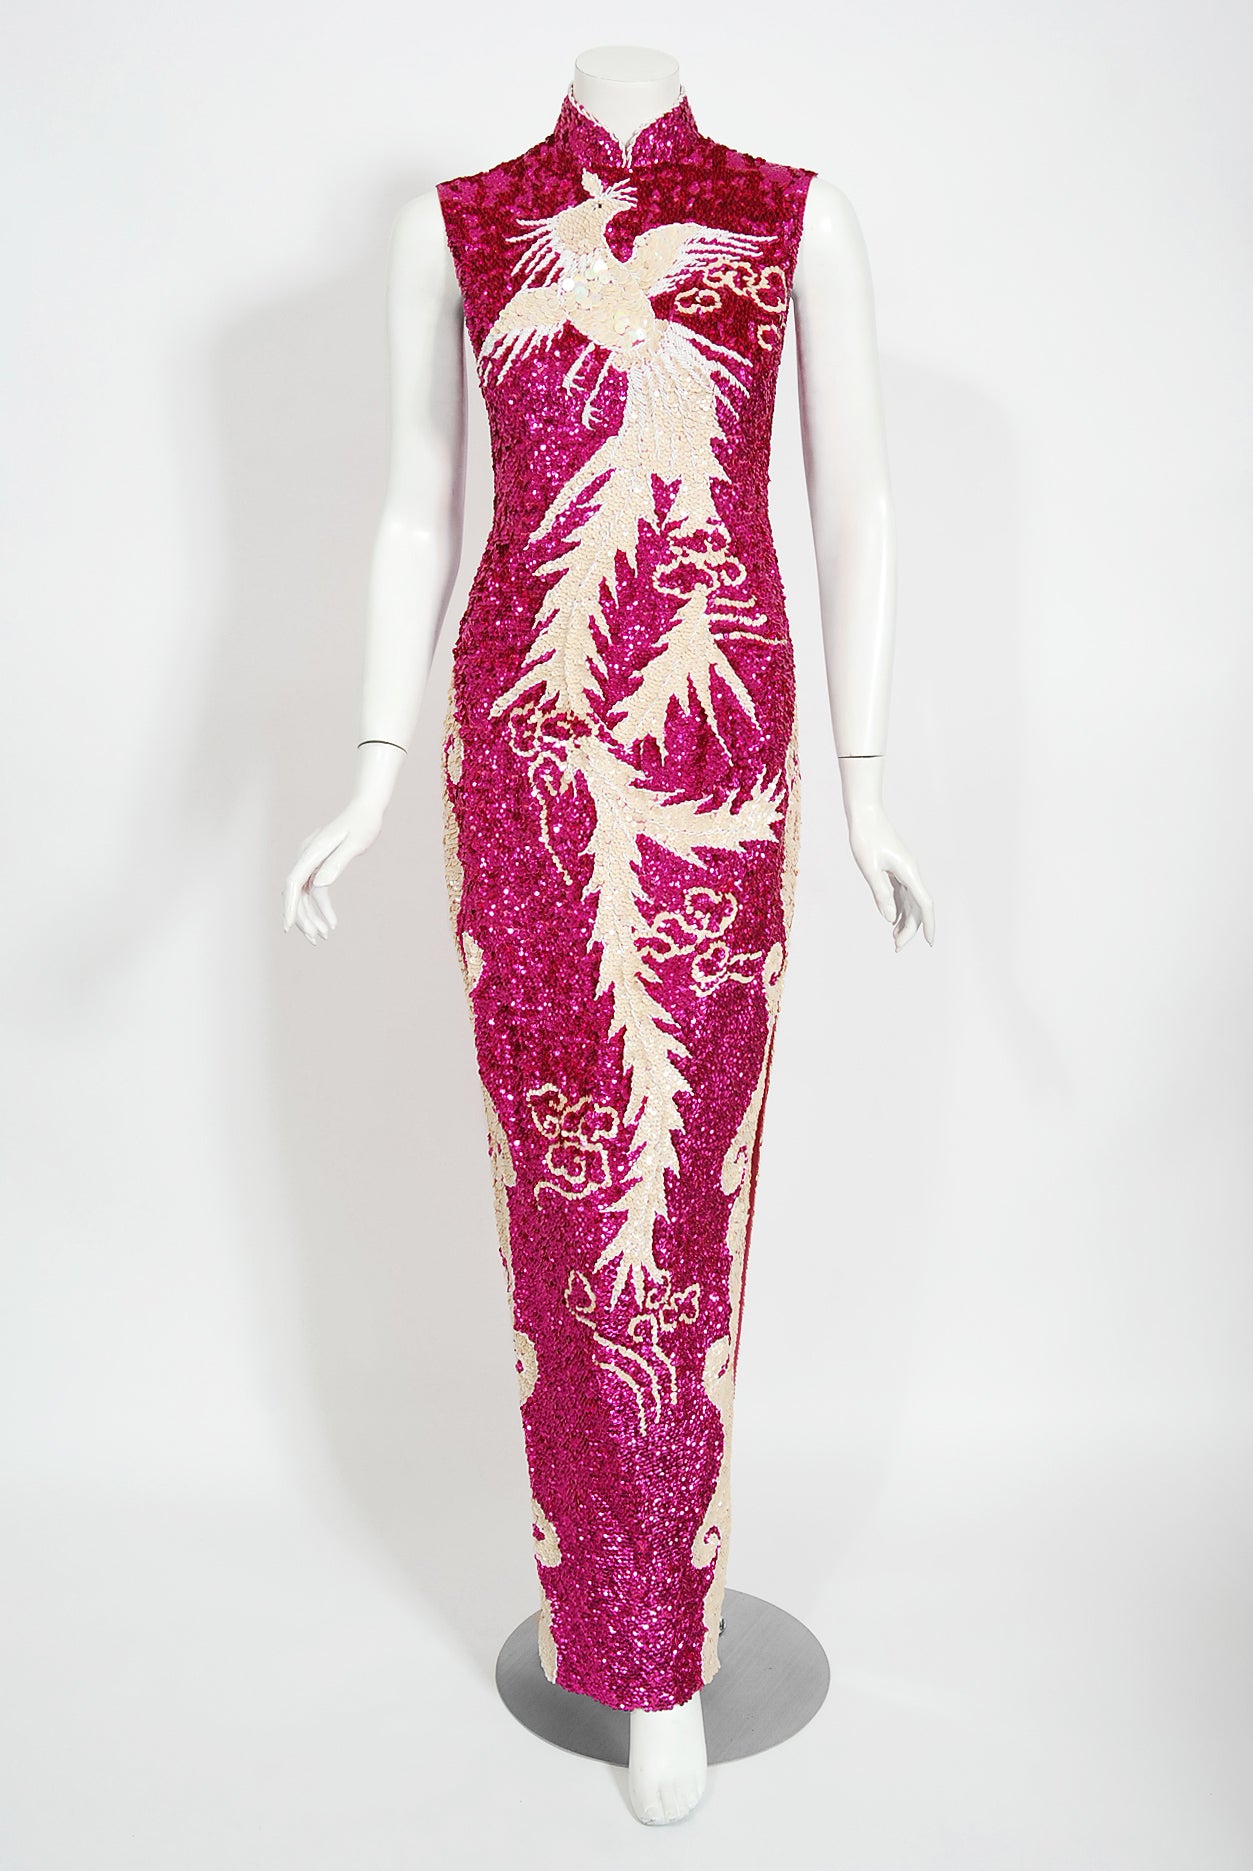 A sensational fully-sequin magenta pink hourglass cheongsam gown dating back to the mid 1960's. This showgirl showstopper has fantastic three-dimensional sequins which really dazzles the eye. A dramatic flying phoenix bird motif is worked in with